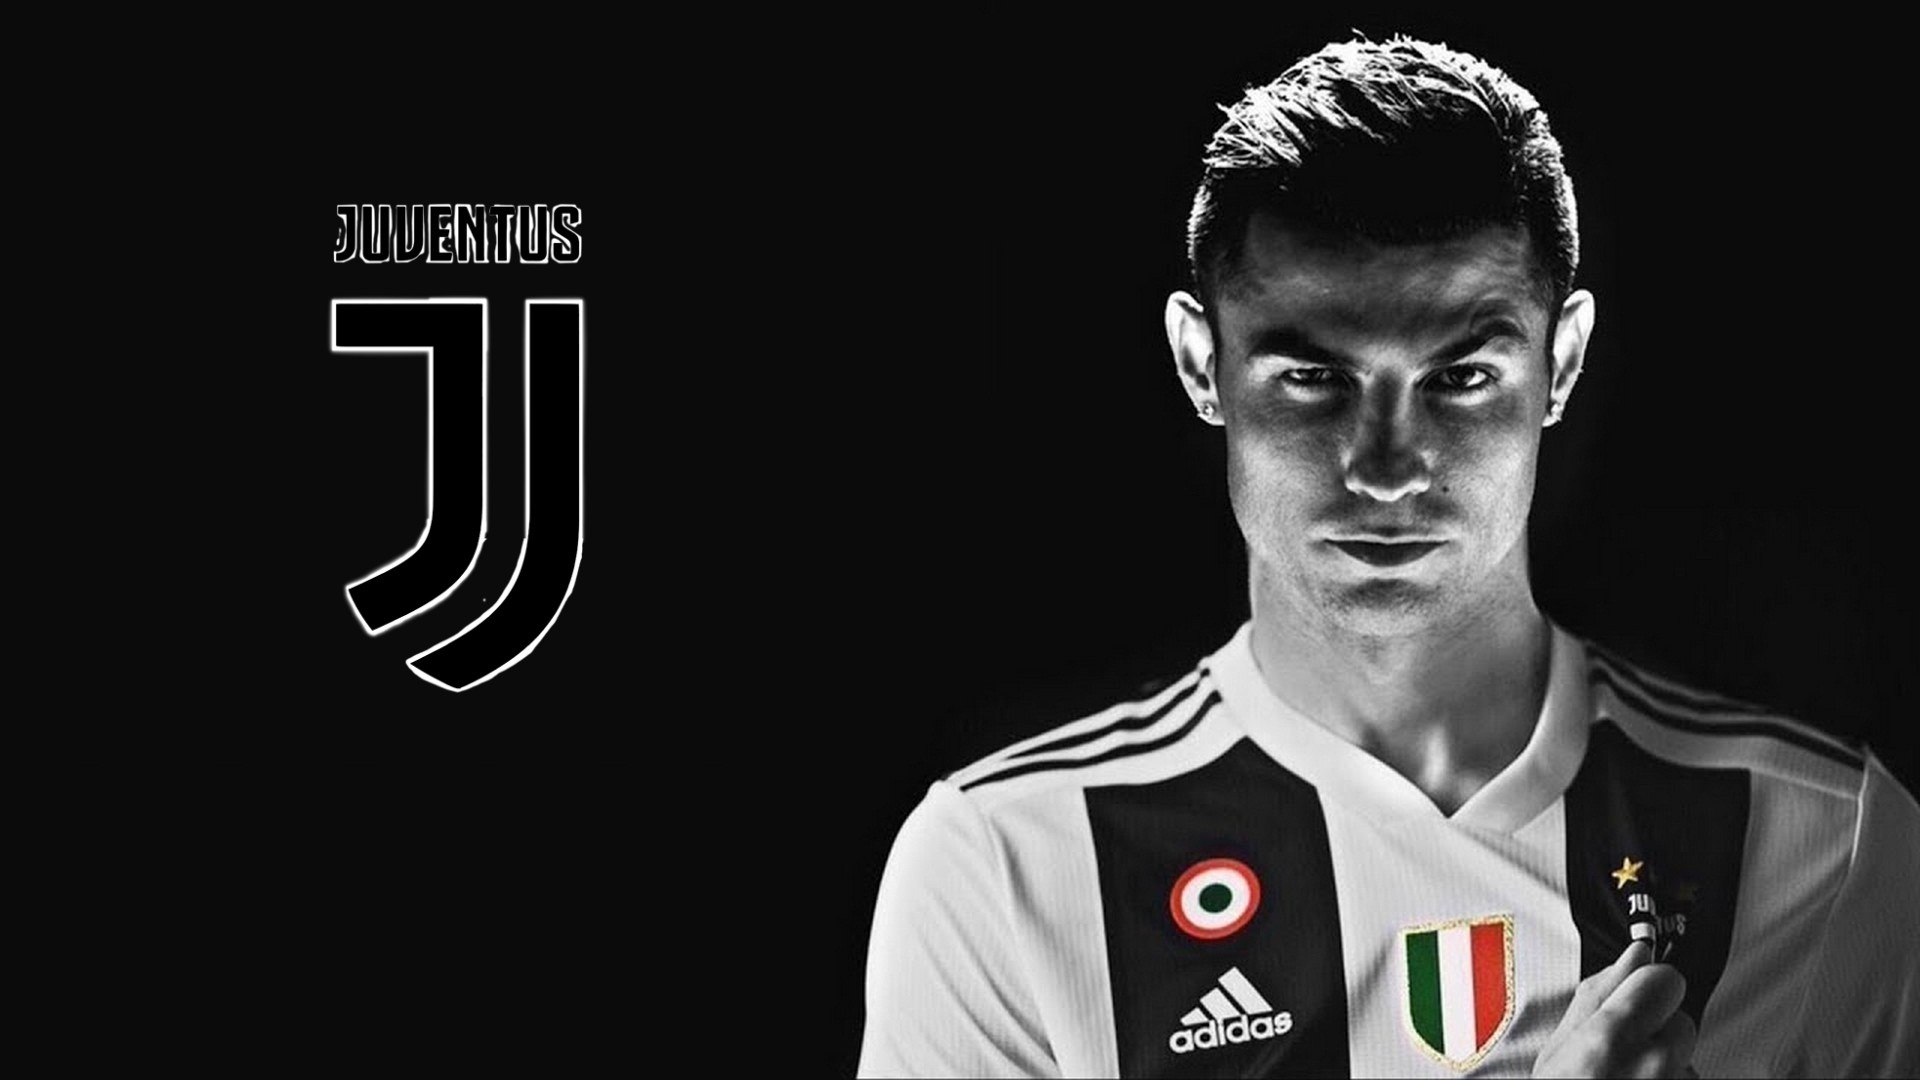 Juventus: Ronaldo, A professional soccer player. 1920x1080 Full HD Background.